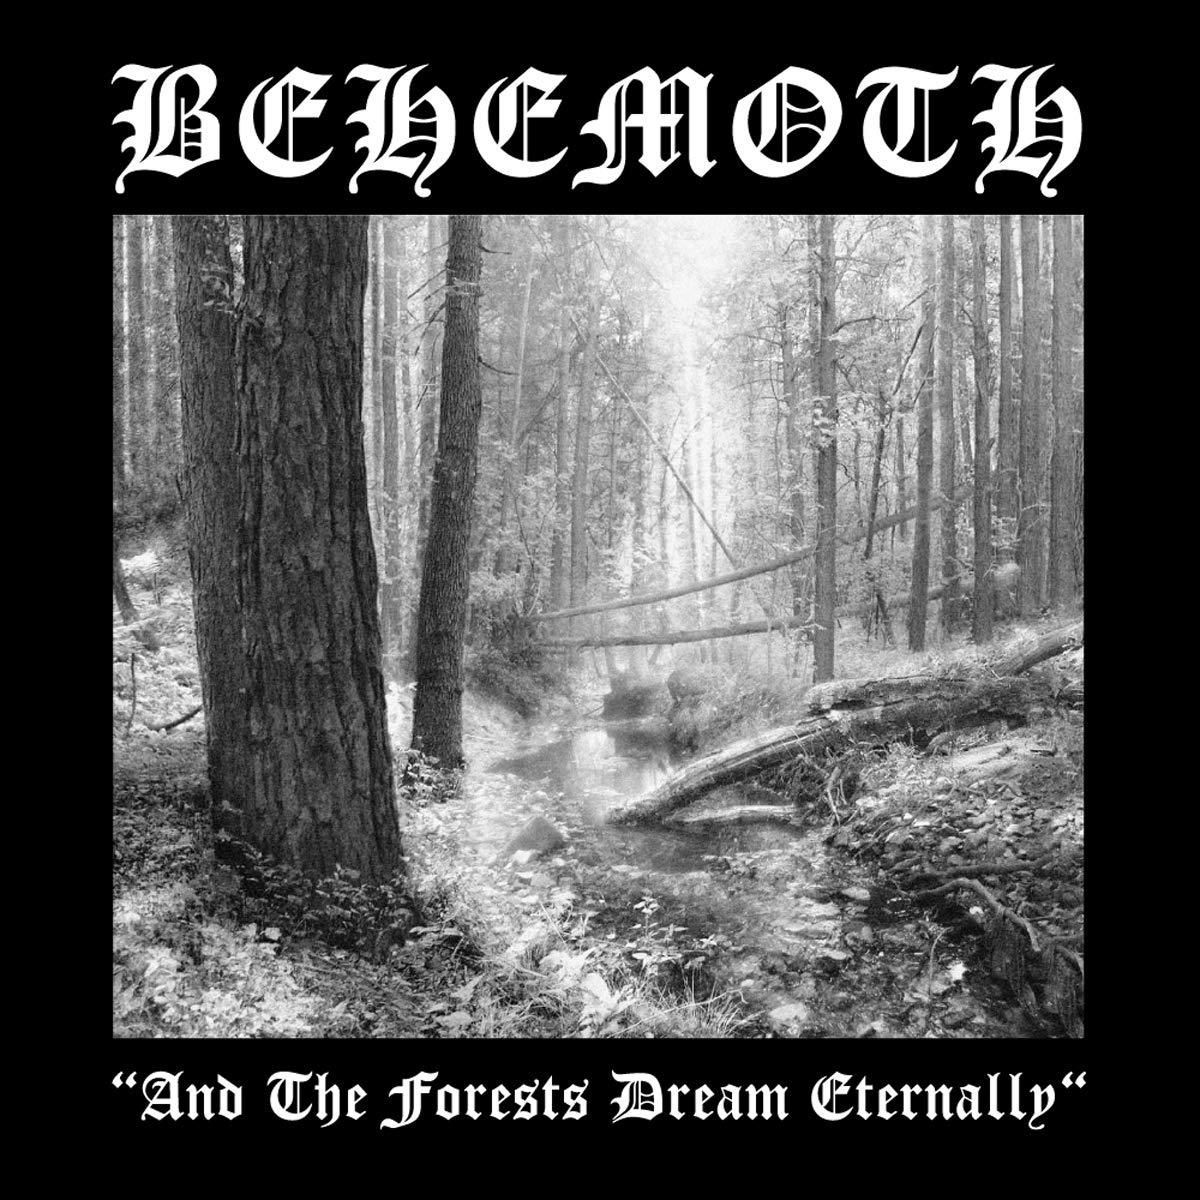 CD Behemoth - And the forests dream eternally